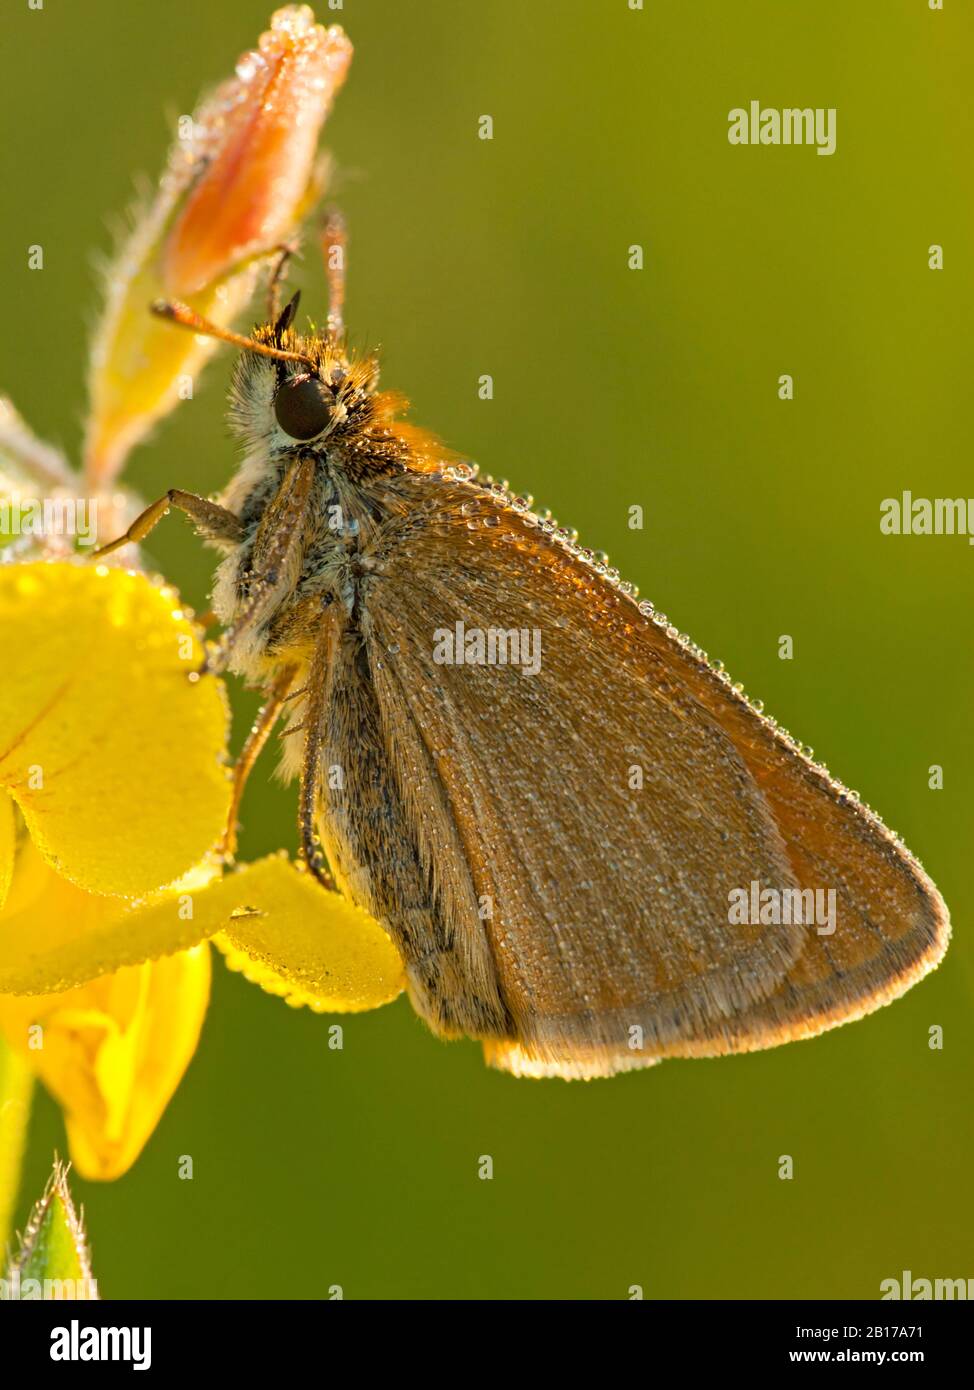 Essex skipper (Thymelicus lineolus, Thymelicus lineola), sits on a flower, Netherlands, Noord-Brabant Stock Photo